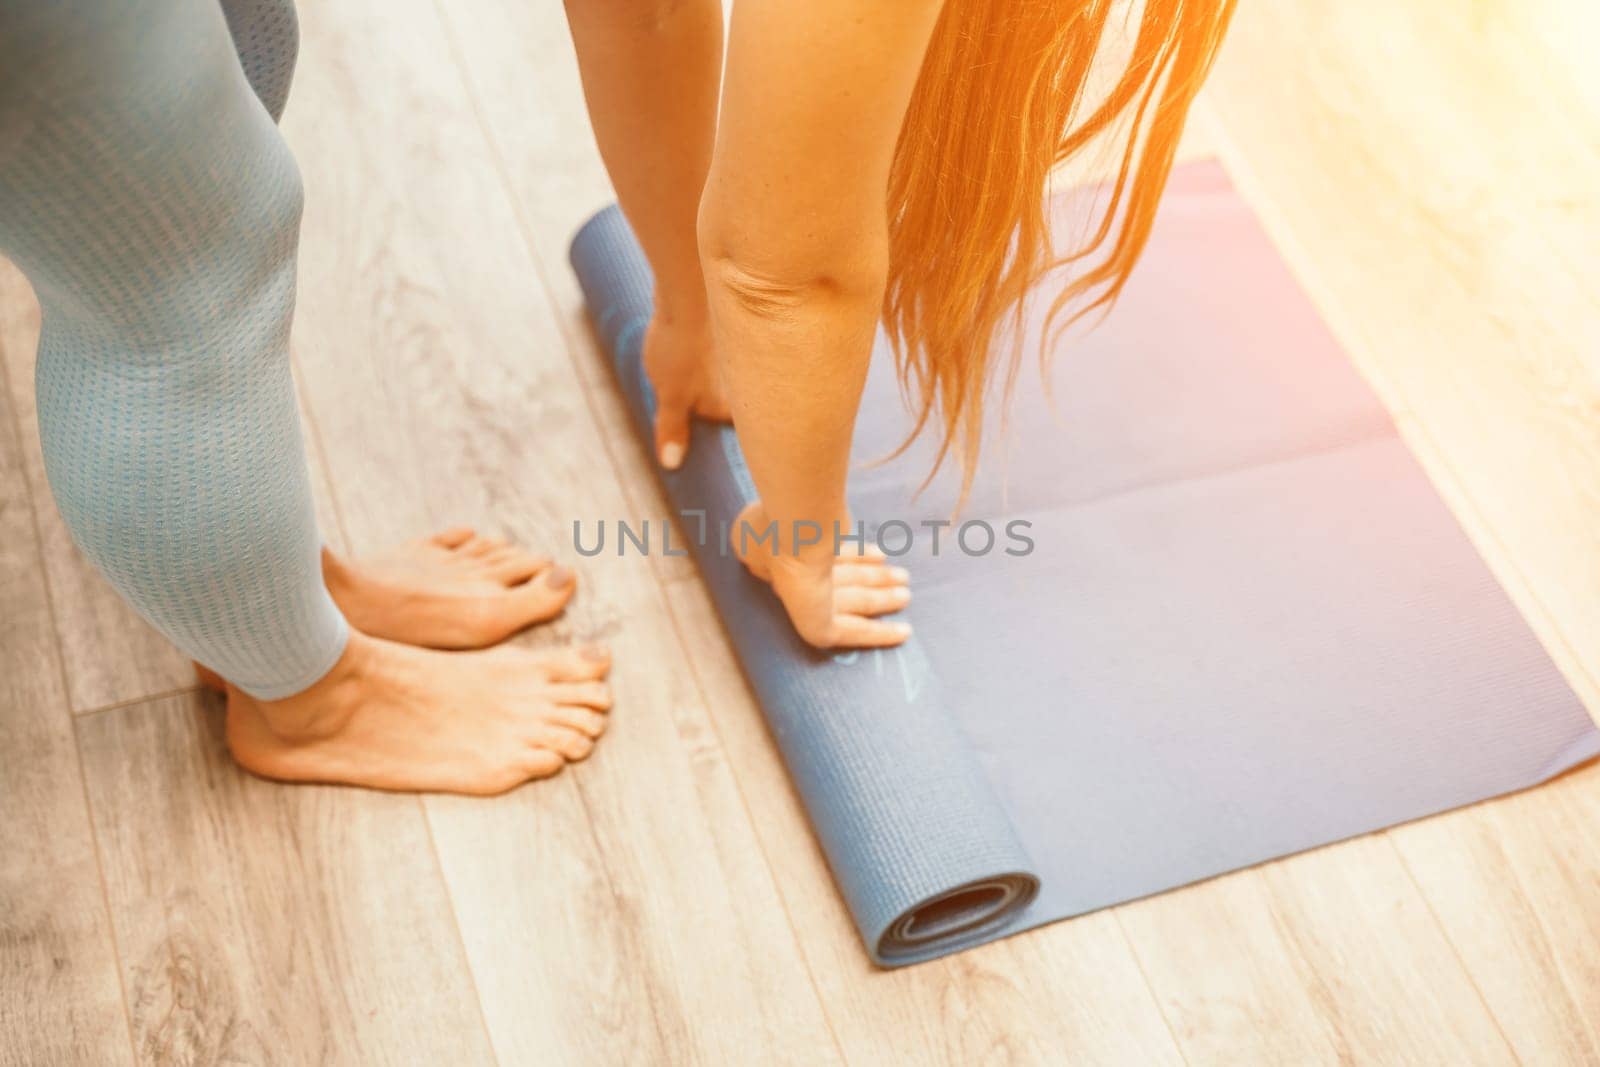 Woman hands rolled up yoga mat on gym floor in yoga fitness training room. Home workout woman close up hands rolling foam yoga gym mat. Woman barefoot home workout sportive healthy lifestyle concept.